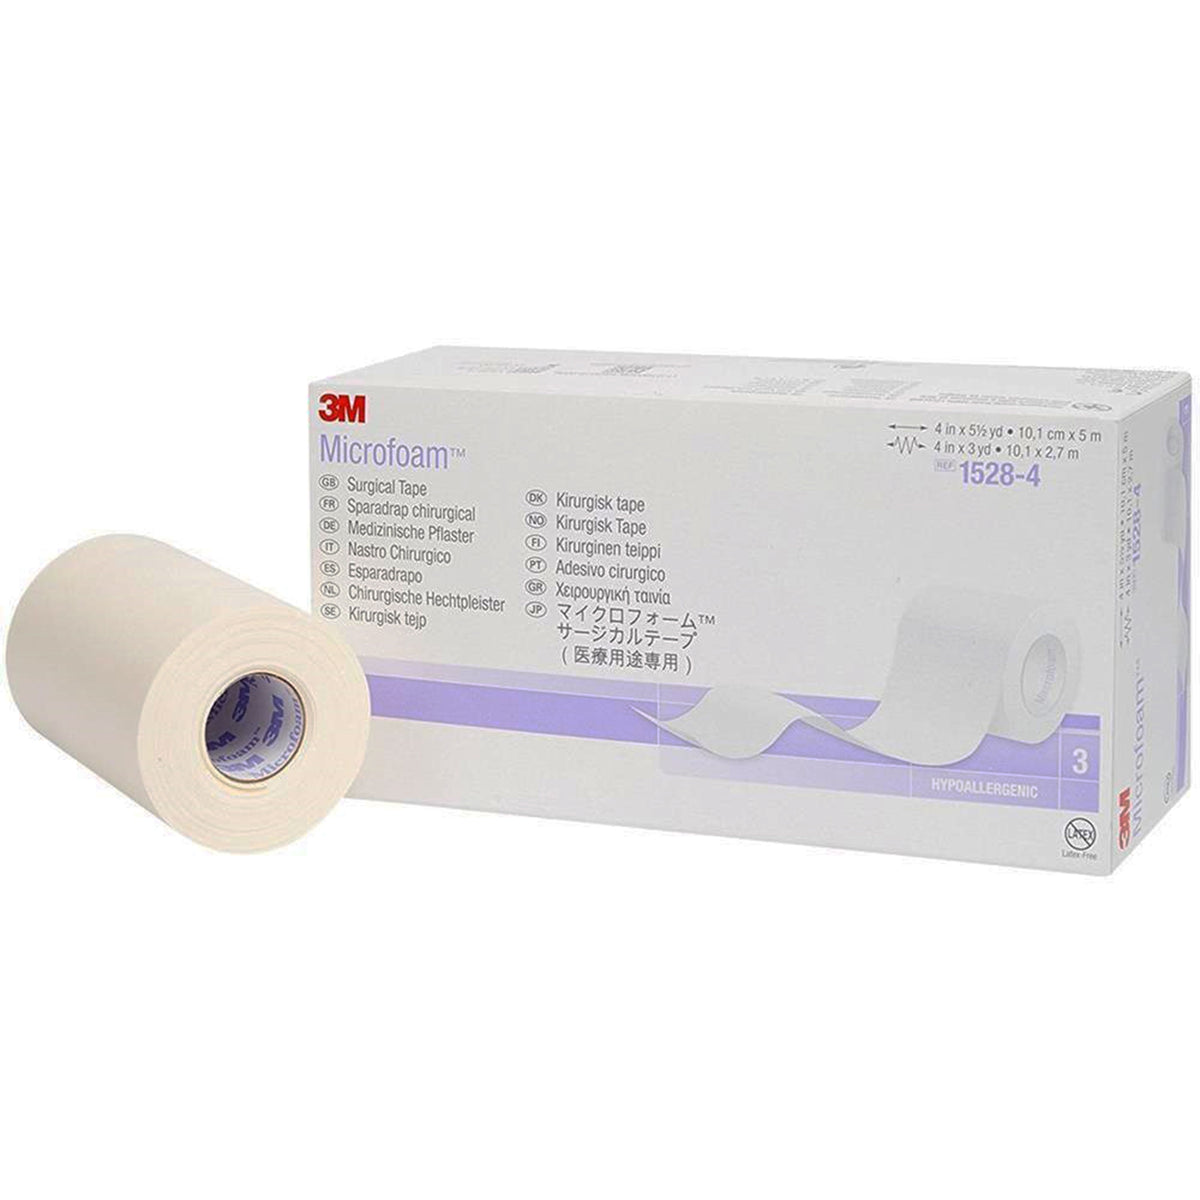 3M 1538-1 Durapore Surgical Tape 1in x 10yd (12/Bx) (x) - GB TECH USA